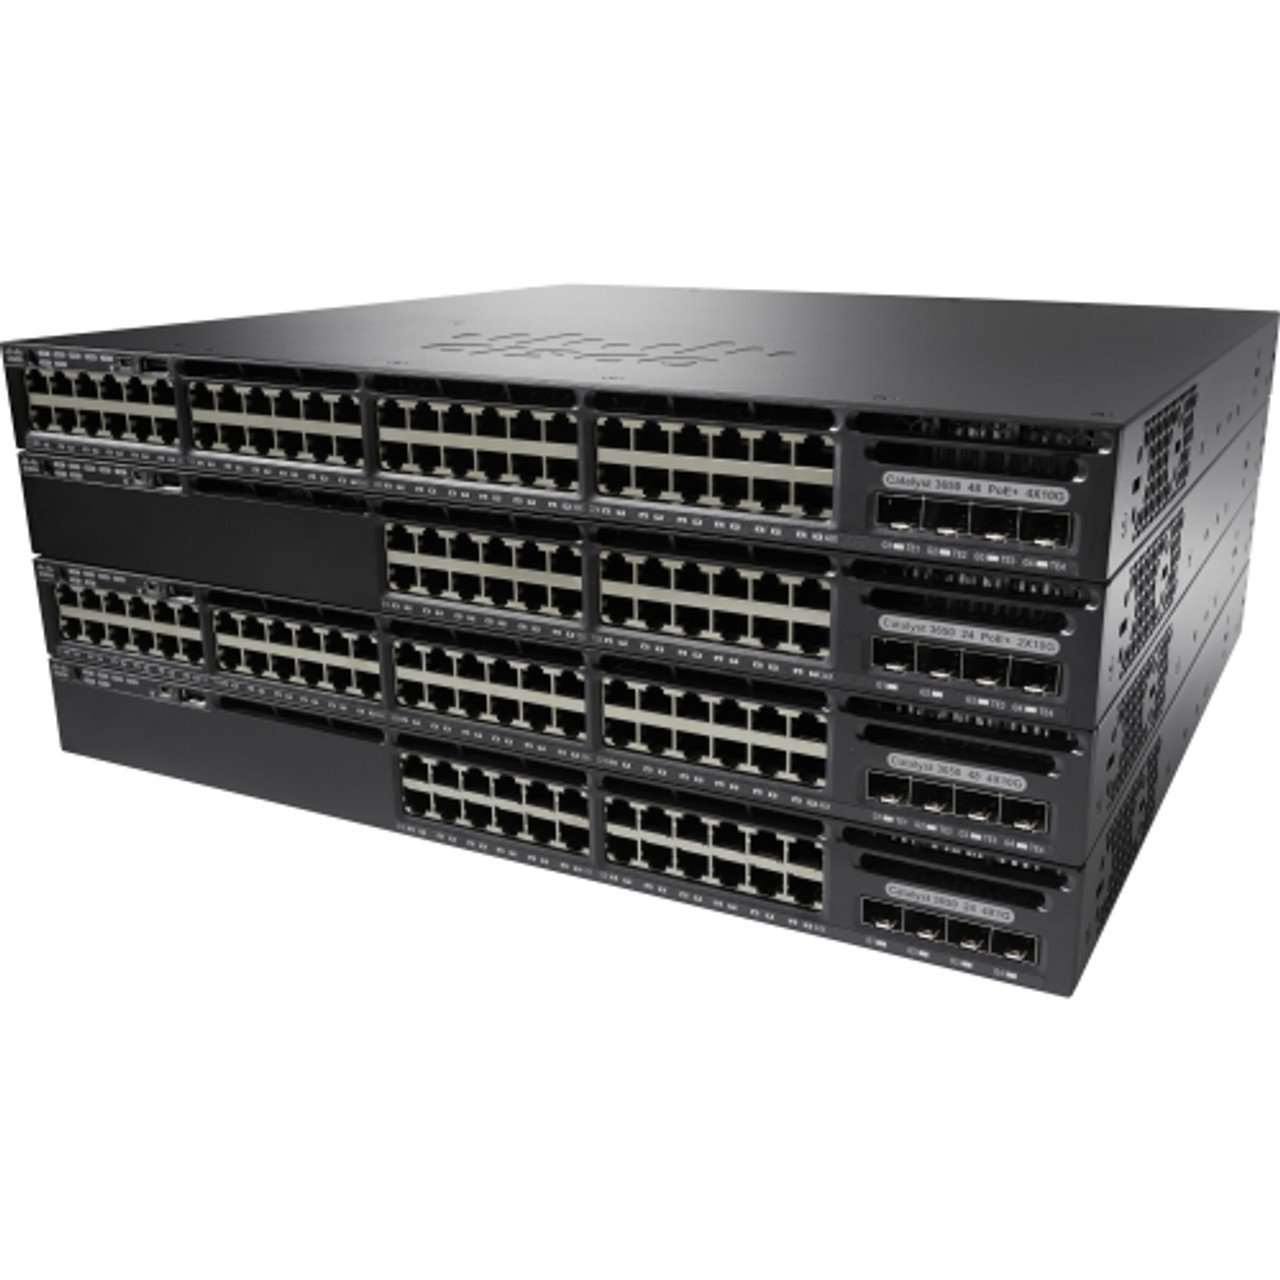 EDU-C3650-24PD-S Cisco Catalyst WS-C3650-24PD 24-Ports Stack Port Optical Fiber and Twisted Pair Layer3 Manageable Rack-Mountable 1U and Desktop Switch with 2x SFP+